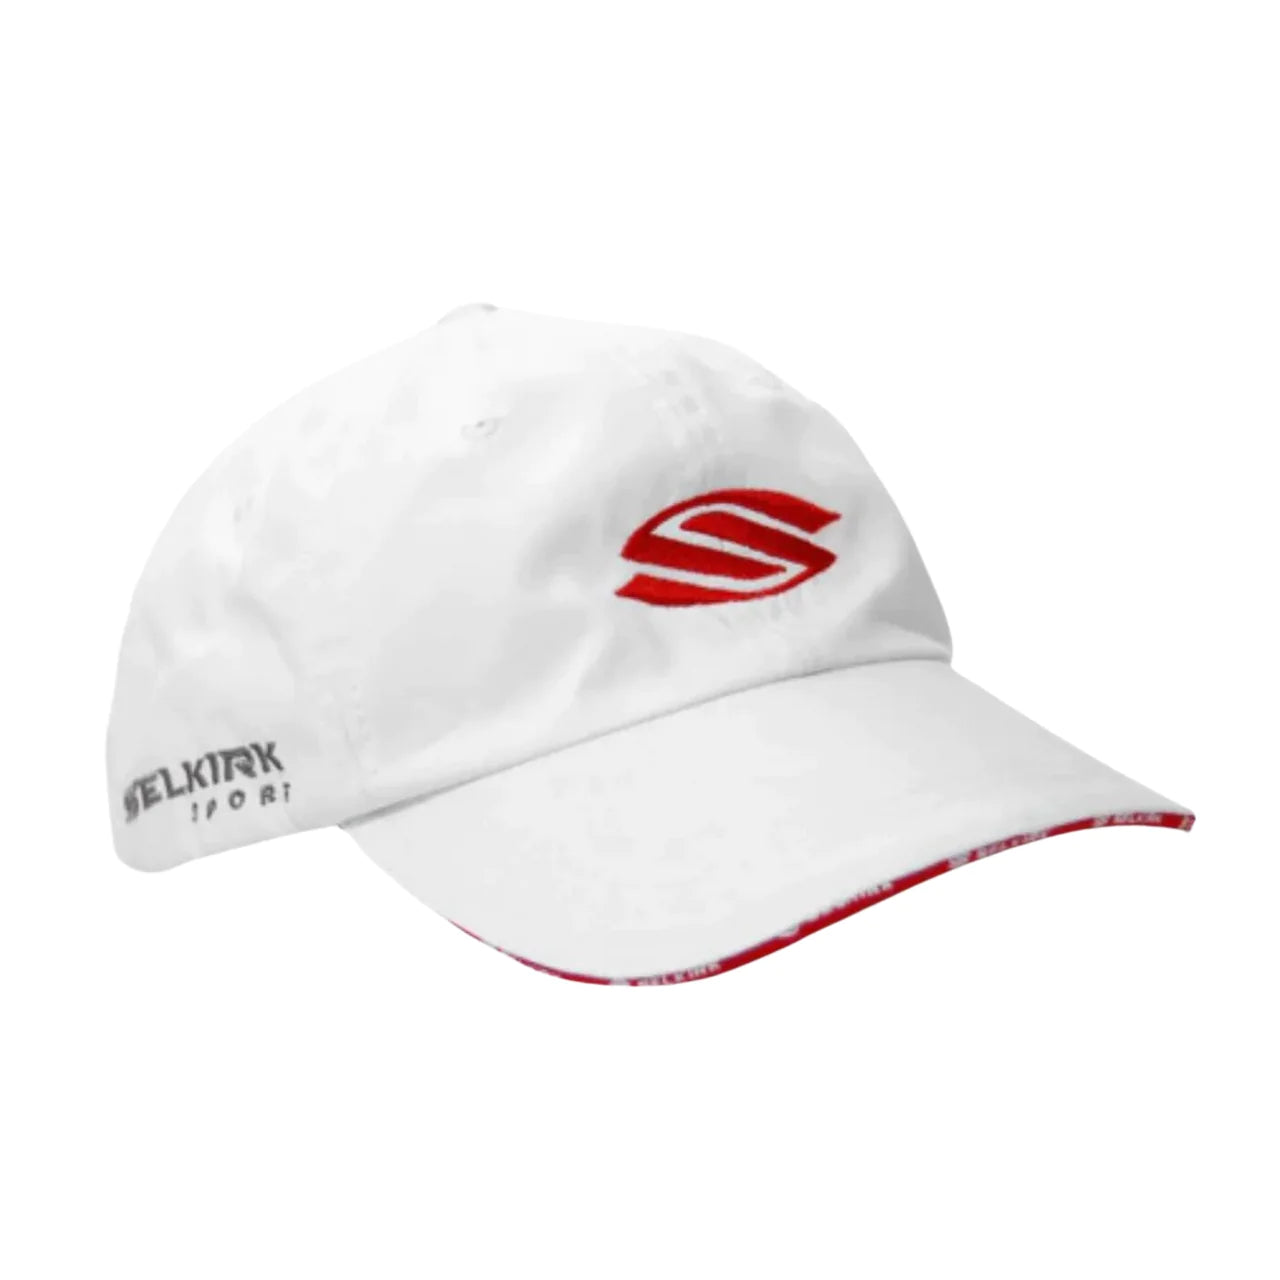 Selkirk Performance Core Hat - White